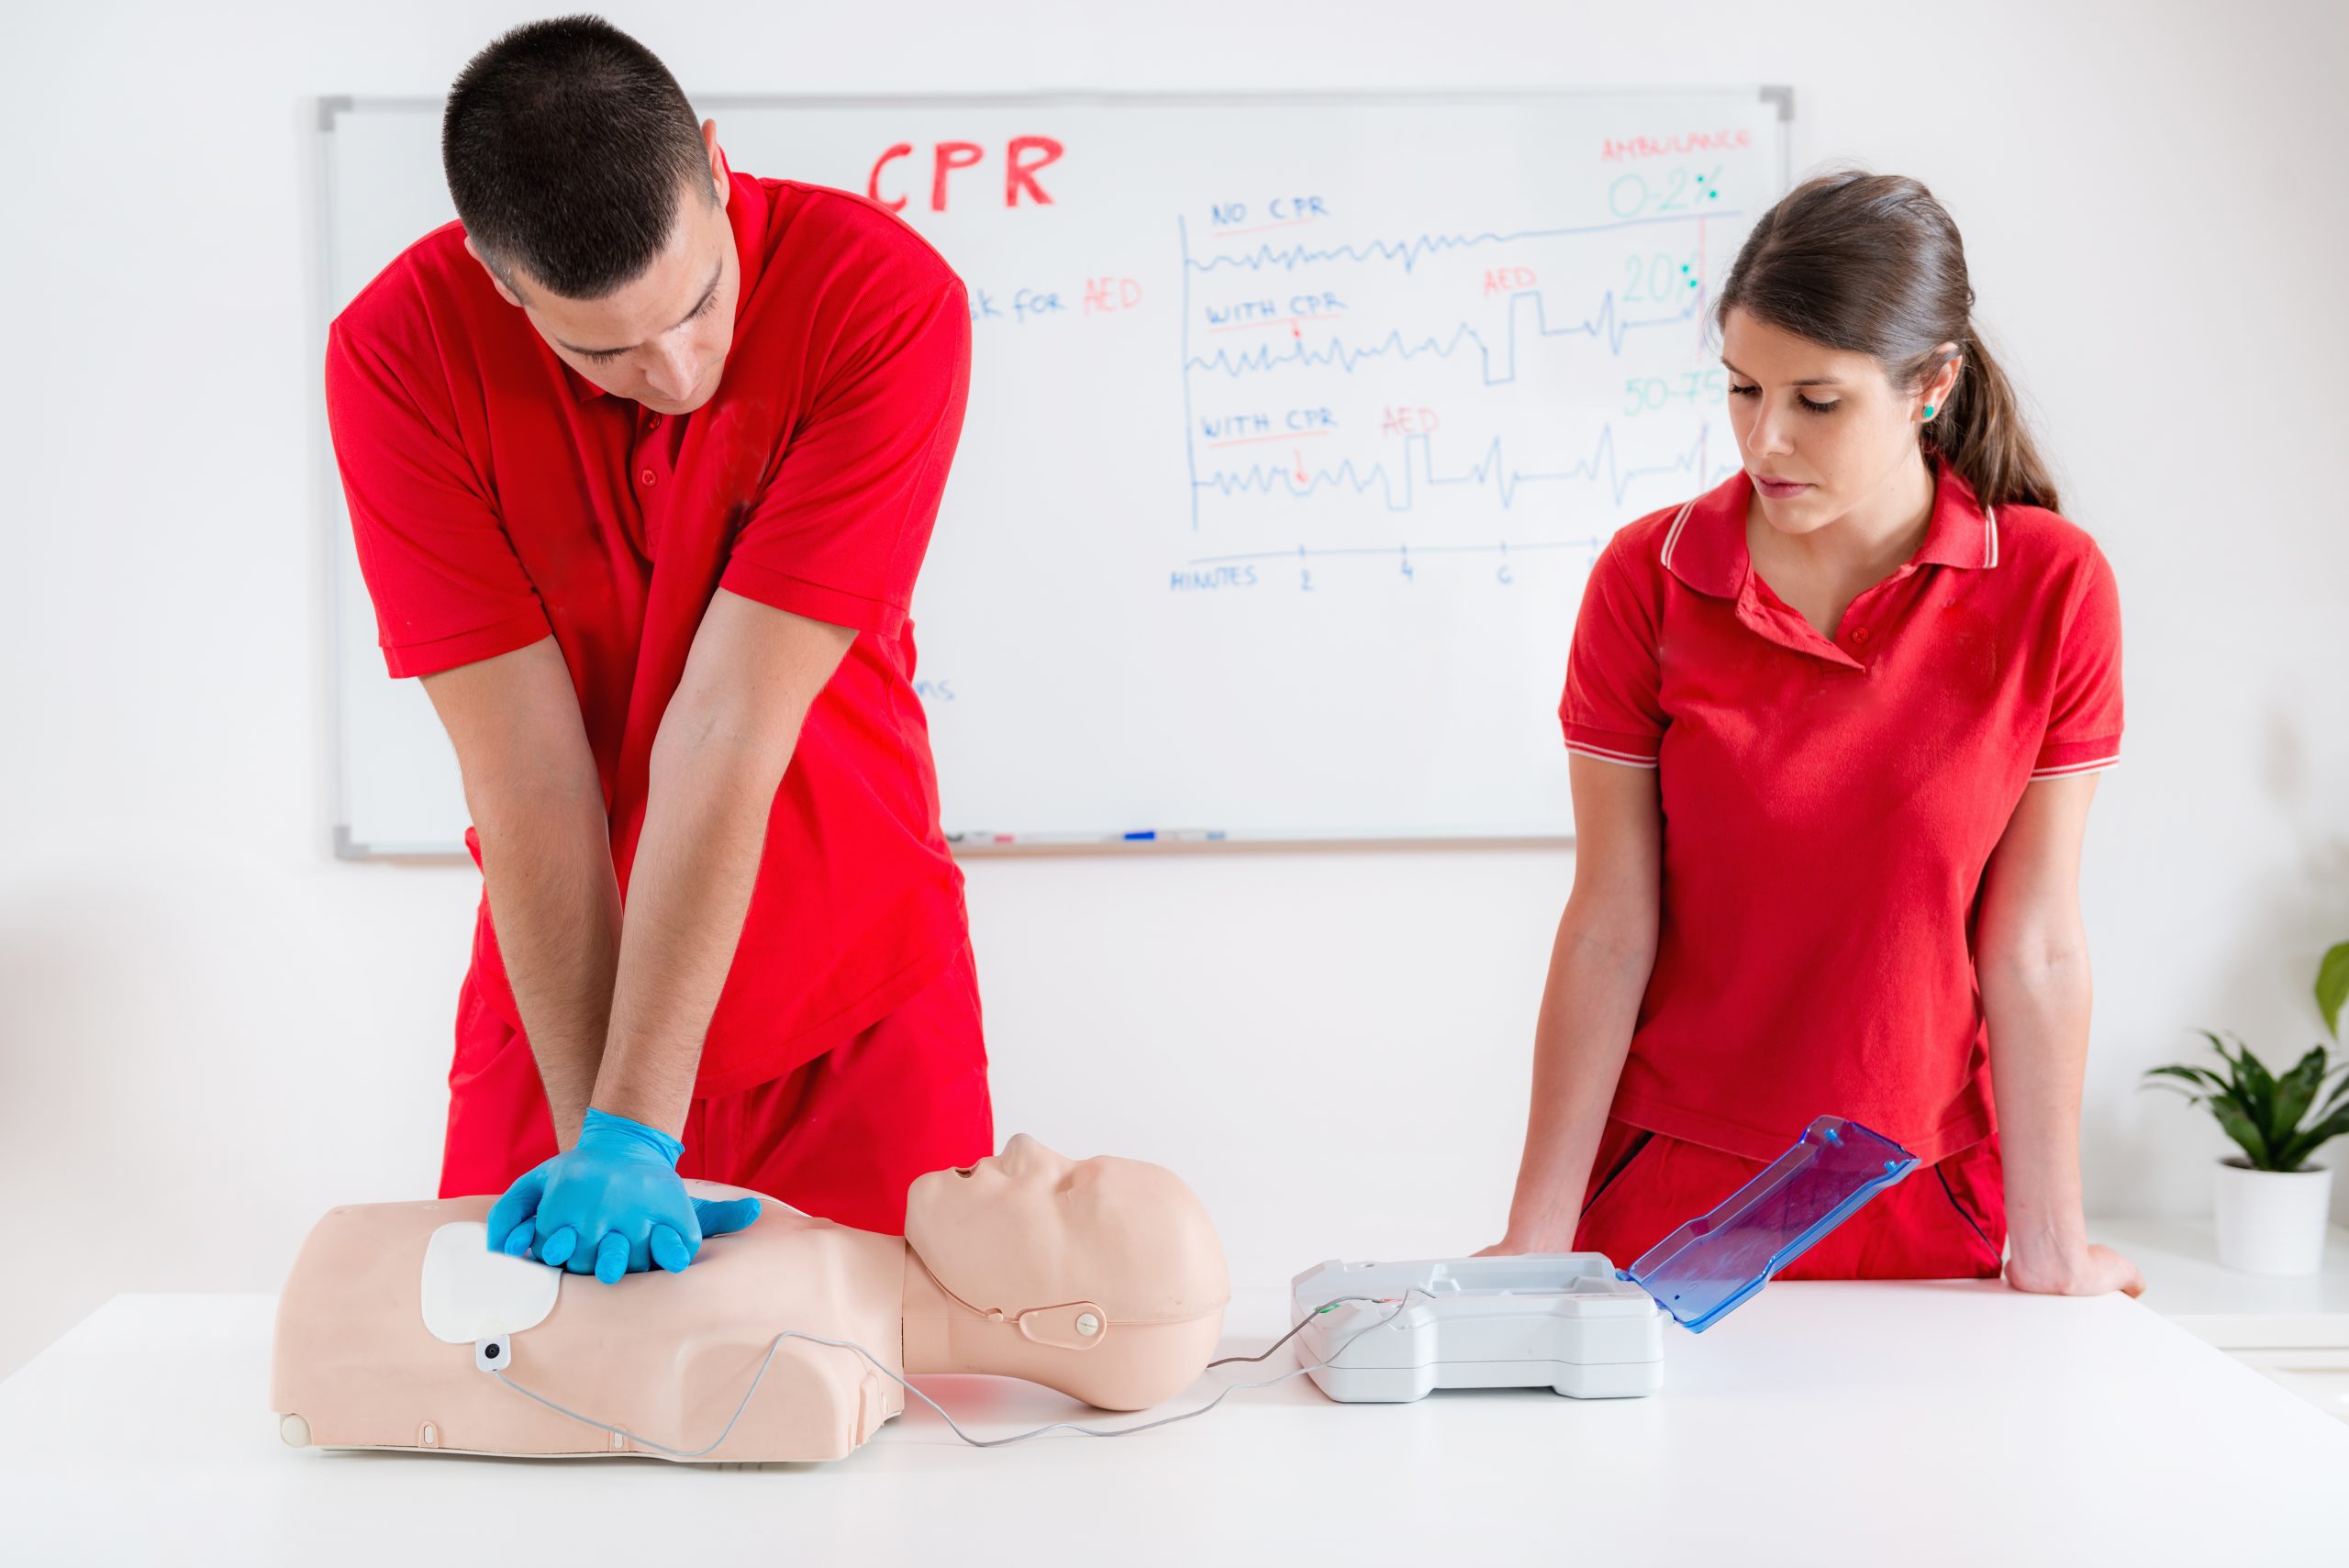 First Aid Training - Cardiopulmonary resuscitation. First aid course.